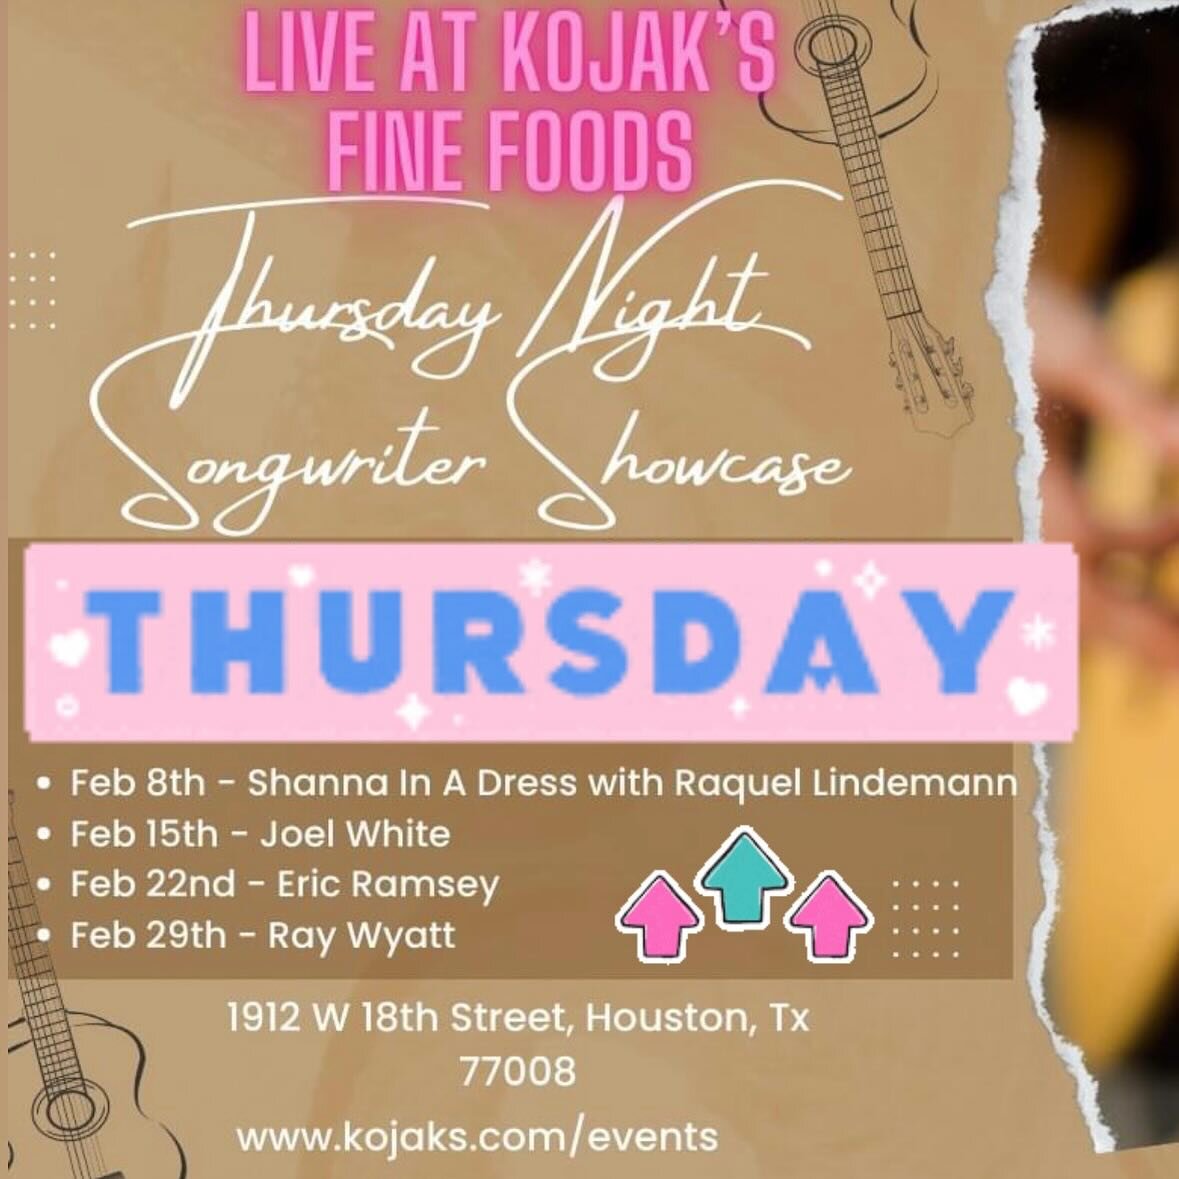 🎶 HOUSTON!!! I am Absolutely GIDDY to come see you!!! THURSDAY 6:30-9pm at Kojak&rsquo;s!!! I will be swapping a few songs with the incredible Shanna in a Dress before her set!! Thank you to Ed Amash and SongCircle Houston for including me in this e